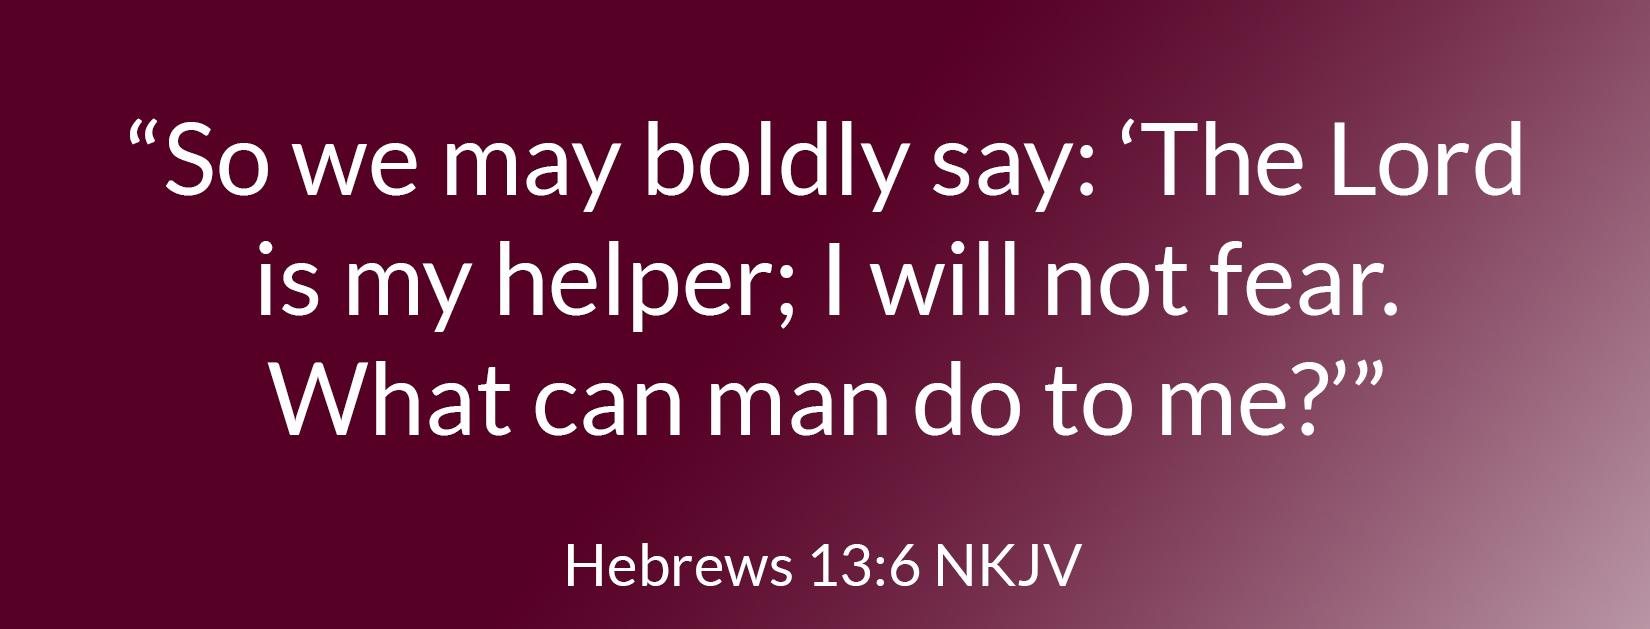 “So we may boldly say: “The Lord is my helper; I will not fear. What can man do to me?”” ‭‭Hebrews‬ ‭13:6‬ ‭NKJV‬‬